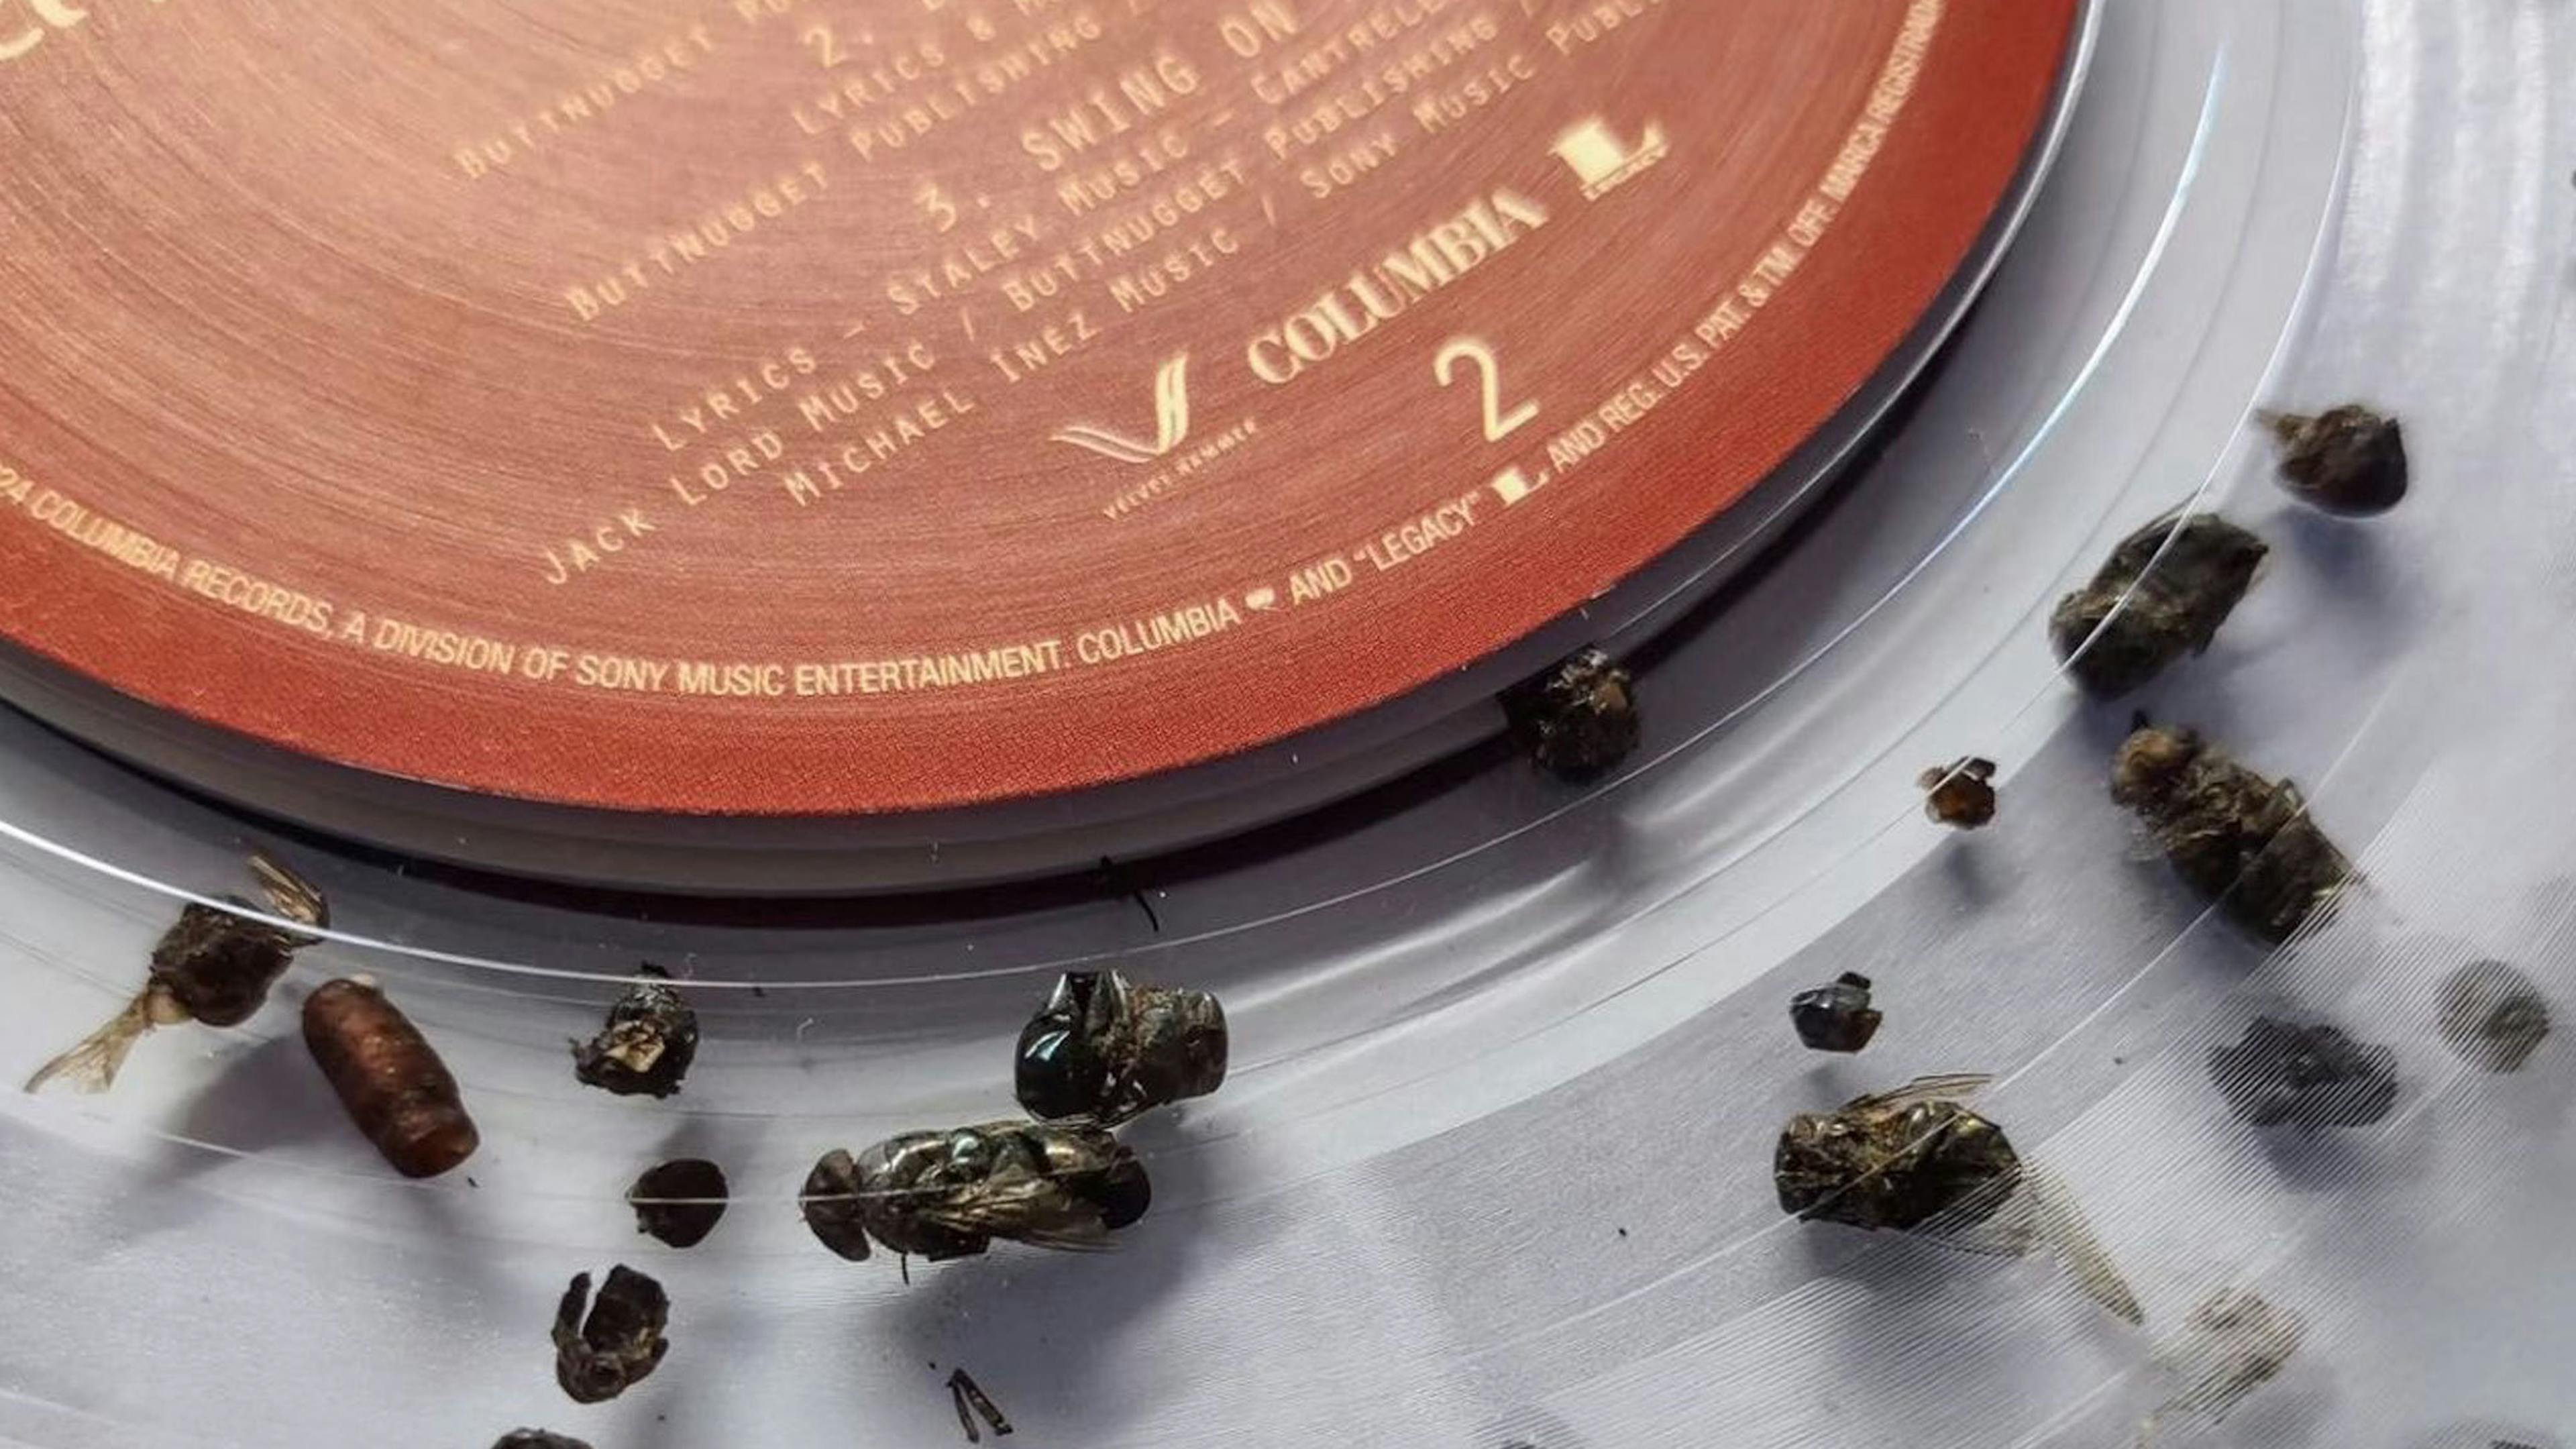 Alice In Chains reissue Jar Of Flies on vinyl… and it’s filled with real dead flies